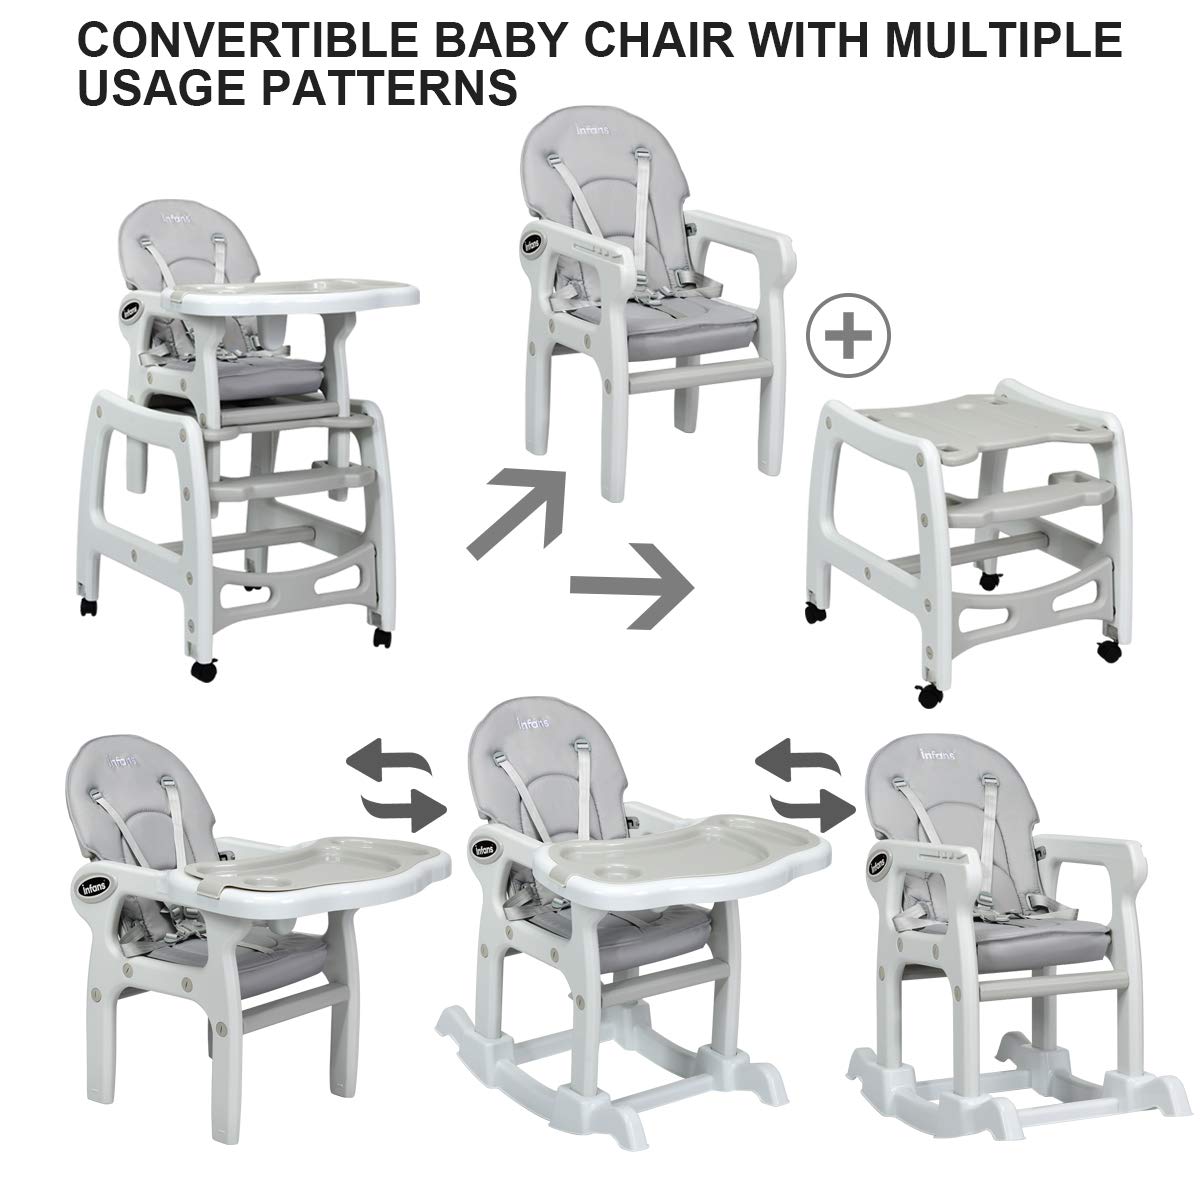 3-in-1 Convertible Baby High Chair with Removable Trays OLAKIDS